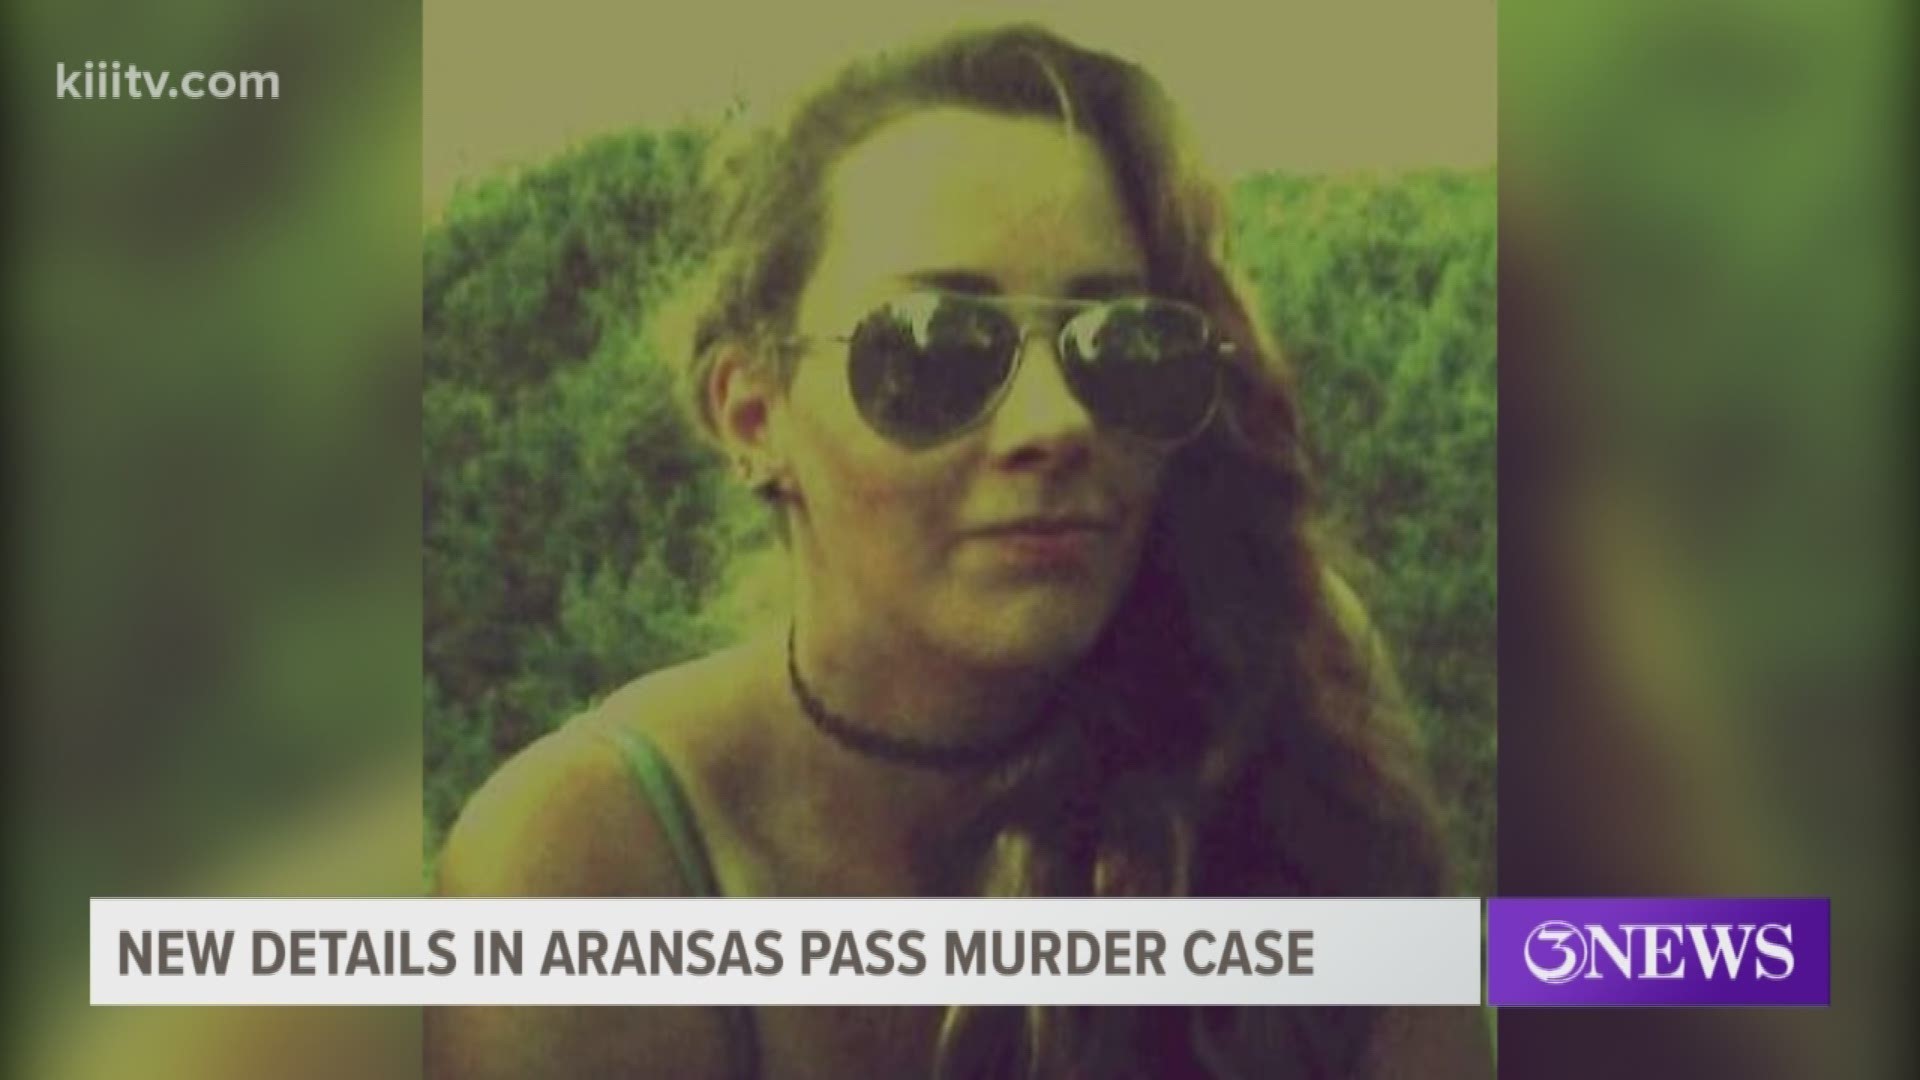 There are new developments in that toolbox murder case over in Aransas Pass.